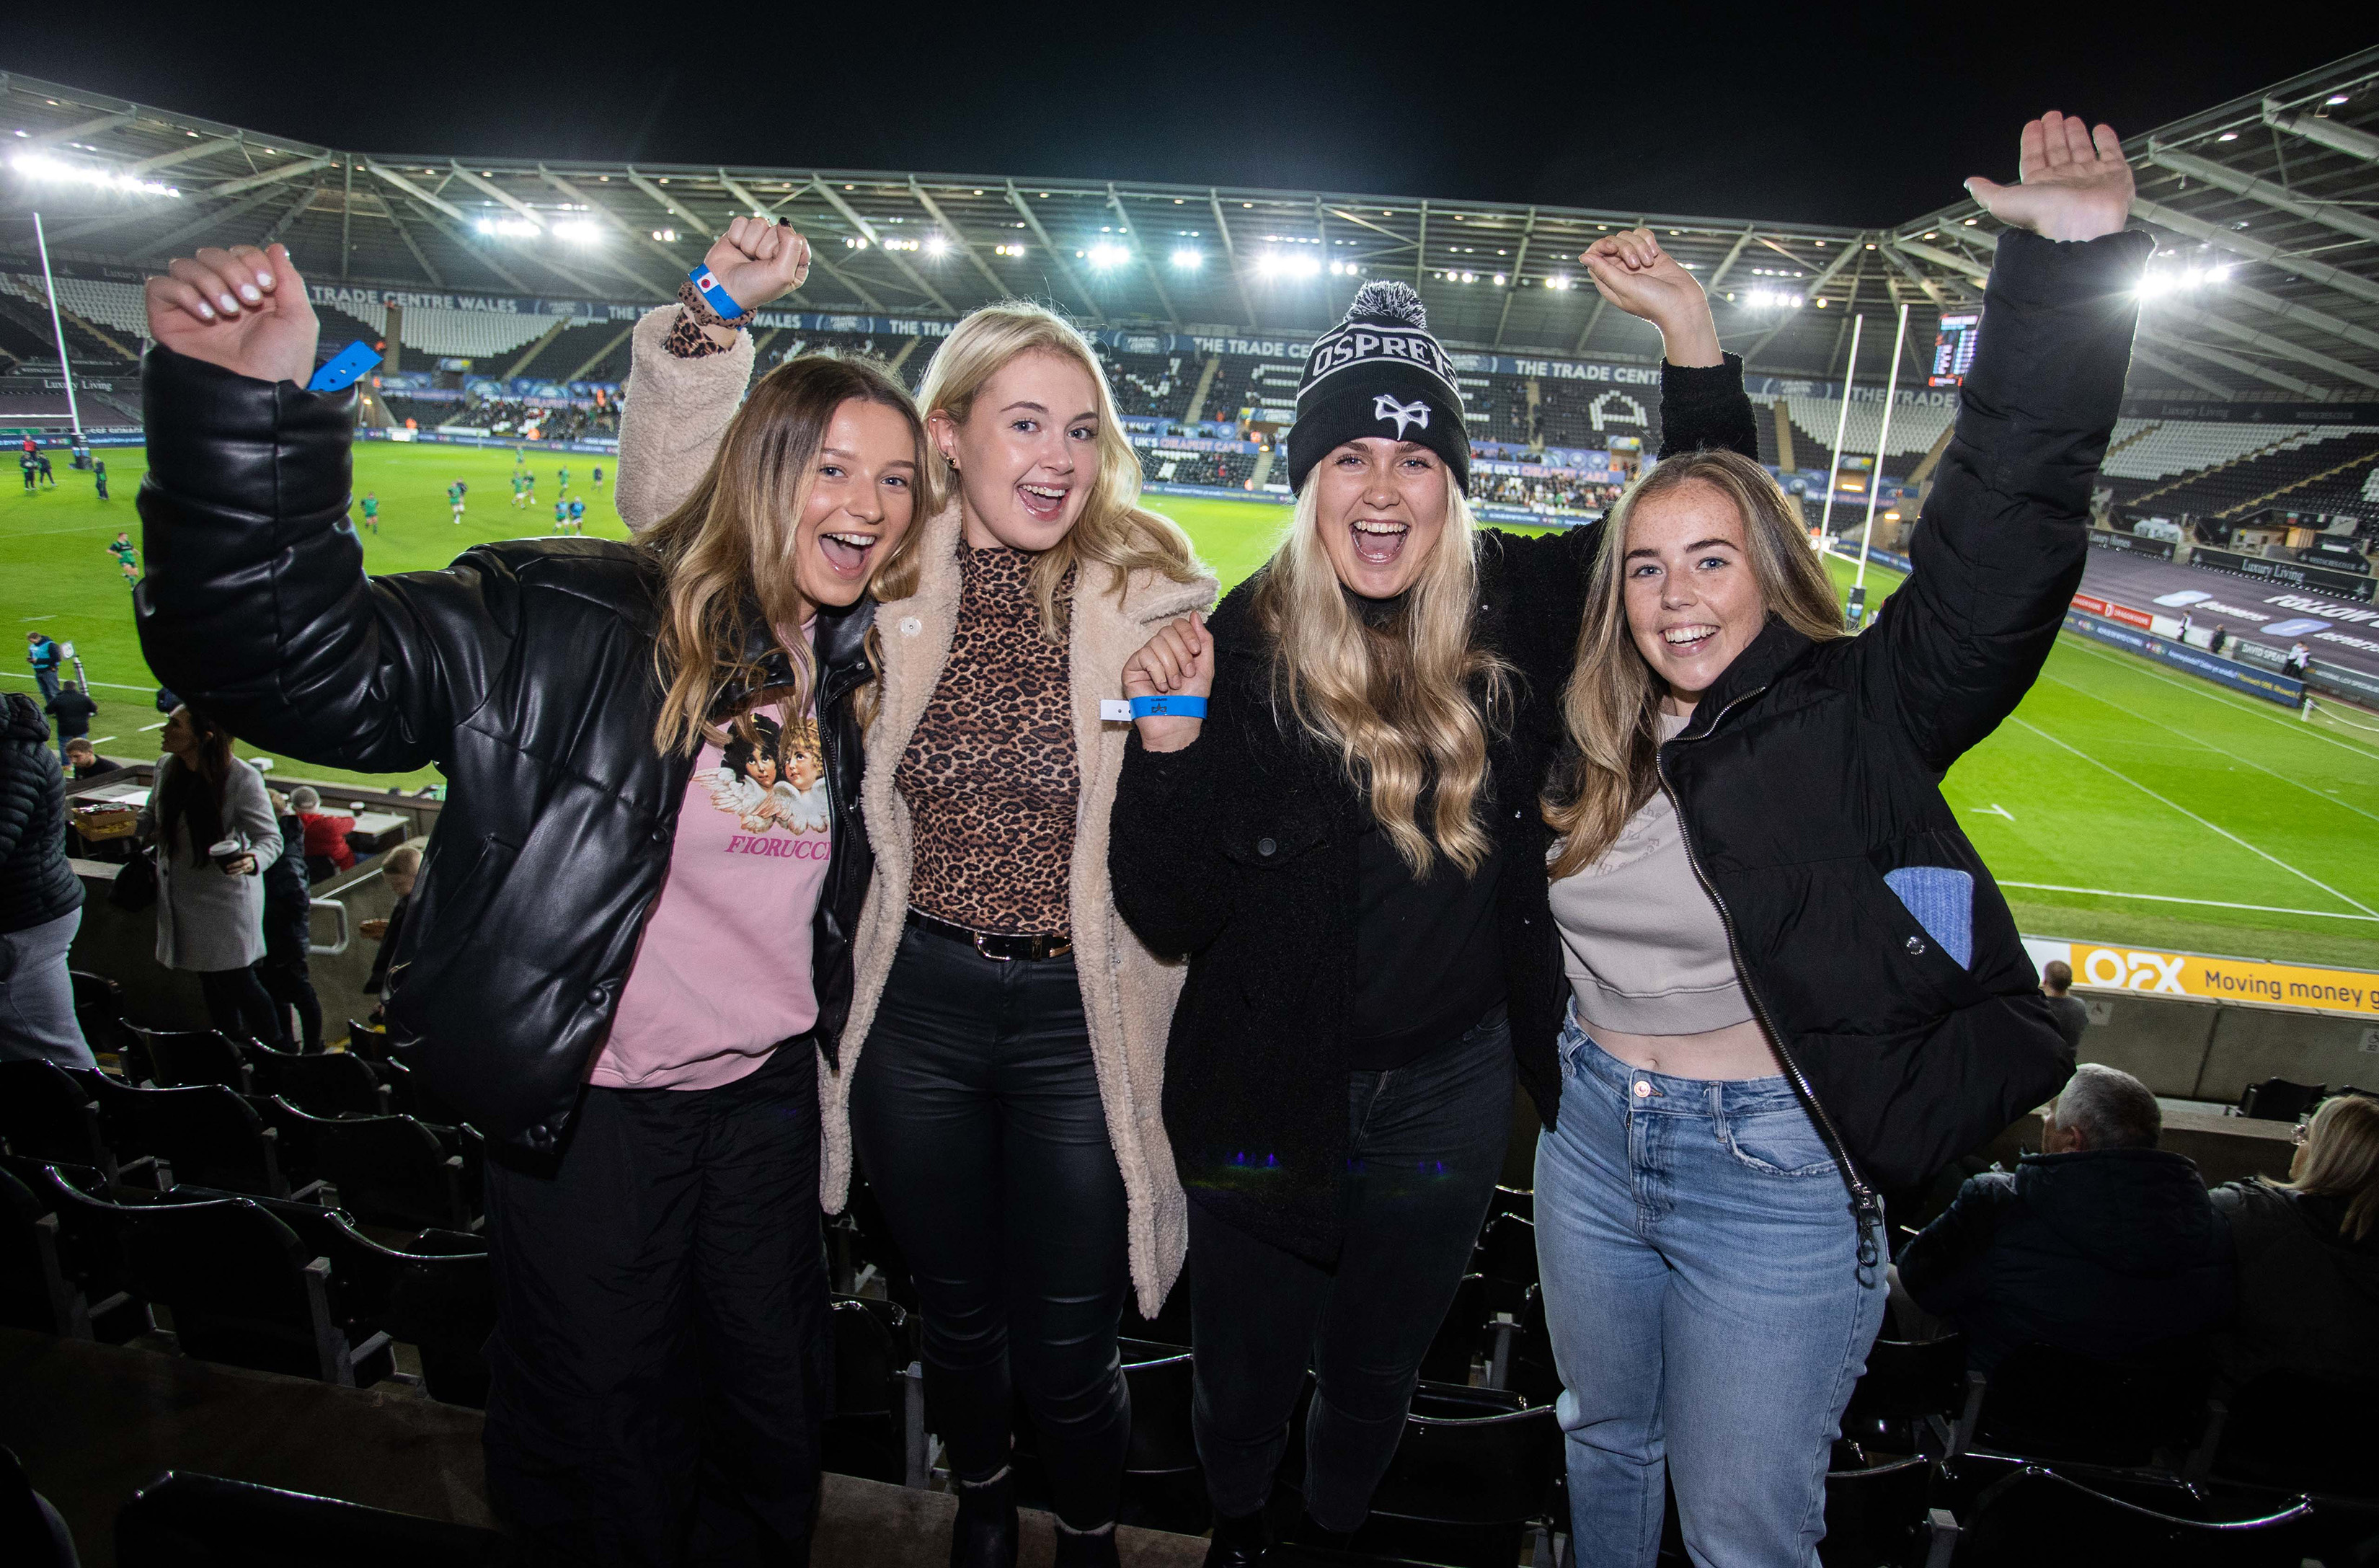 A birthday group celebrating in the stands at the Swansea.Com Stadium